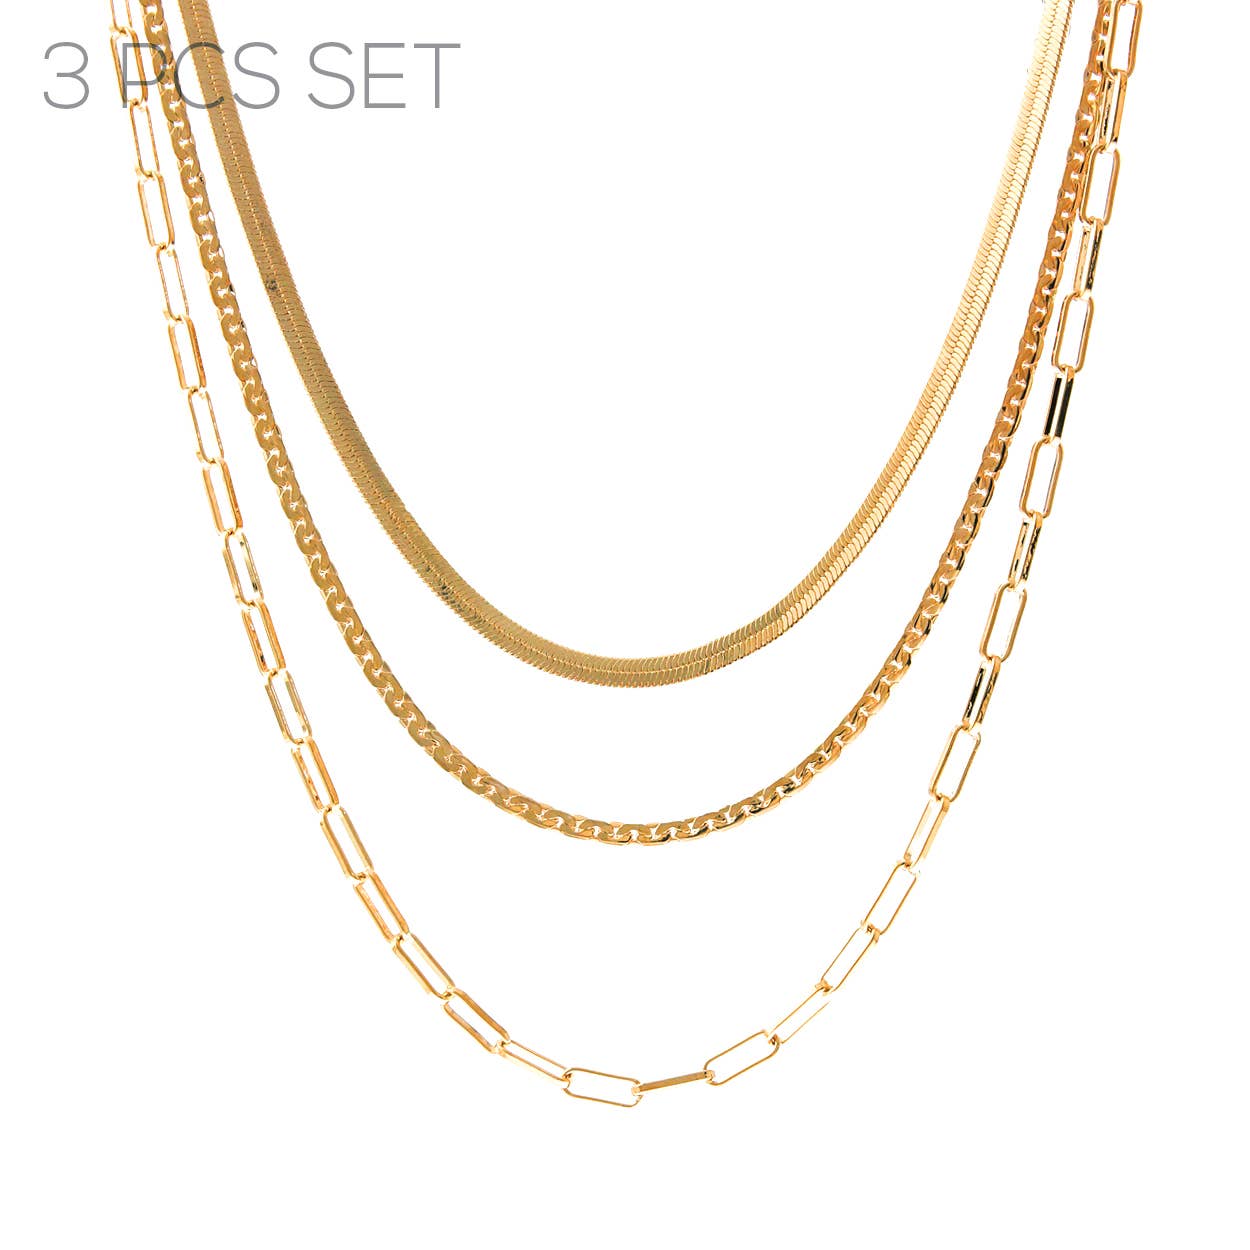 3 Layer Chain Necklace